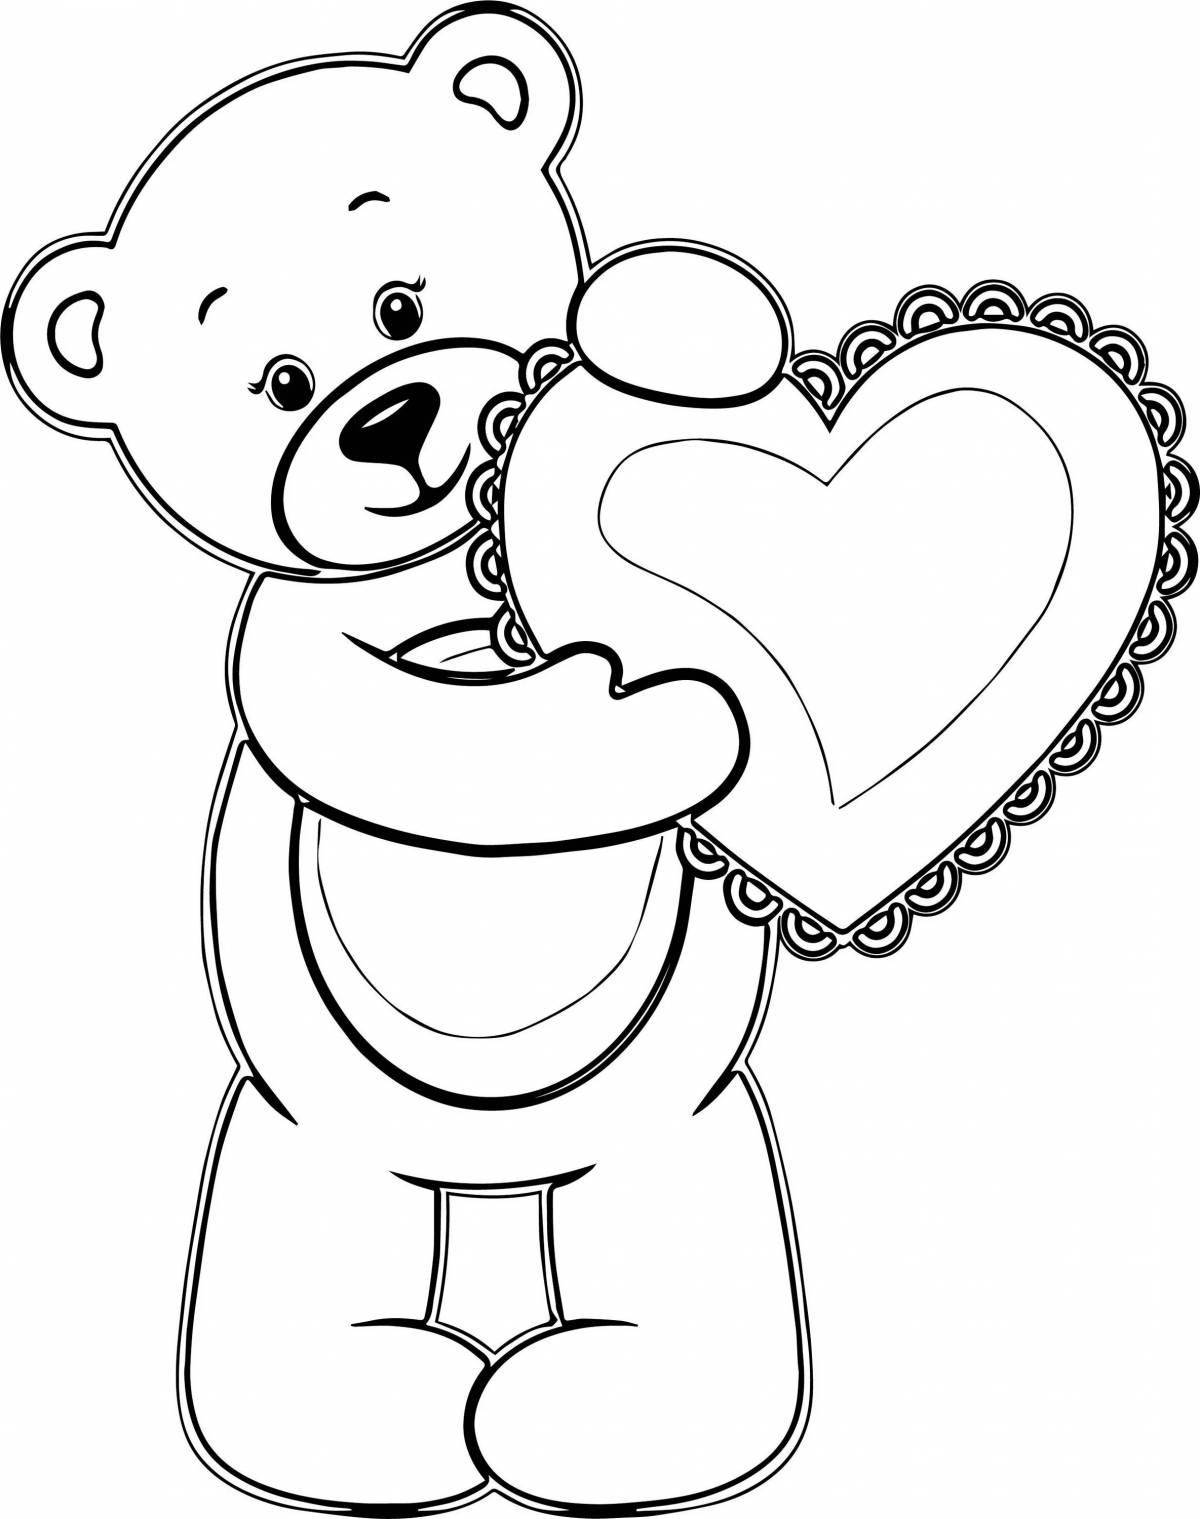 Coloring book kind bear with heart